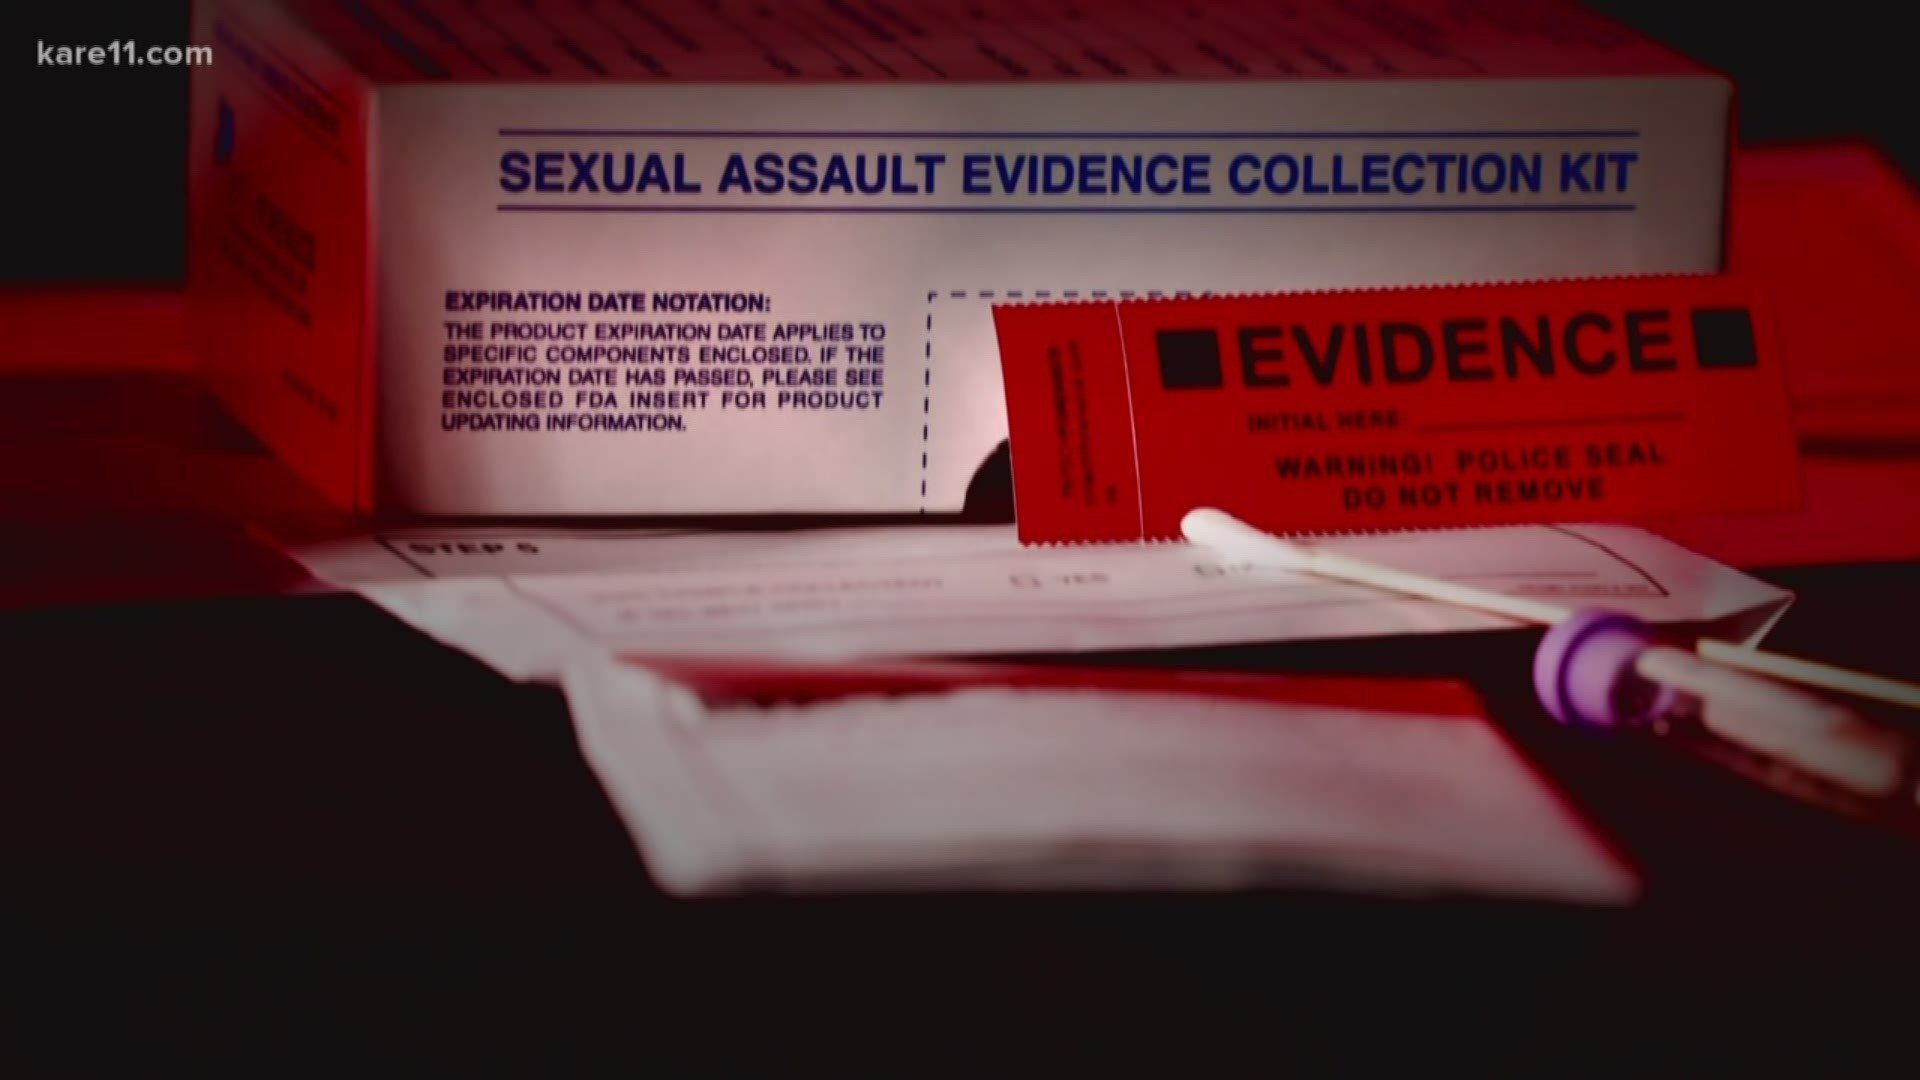 New legislation was prompted by several stories reported by KARE 11 revealing that law enforcement agencies continue to not test rape kits.